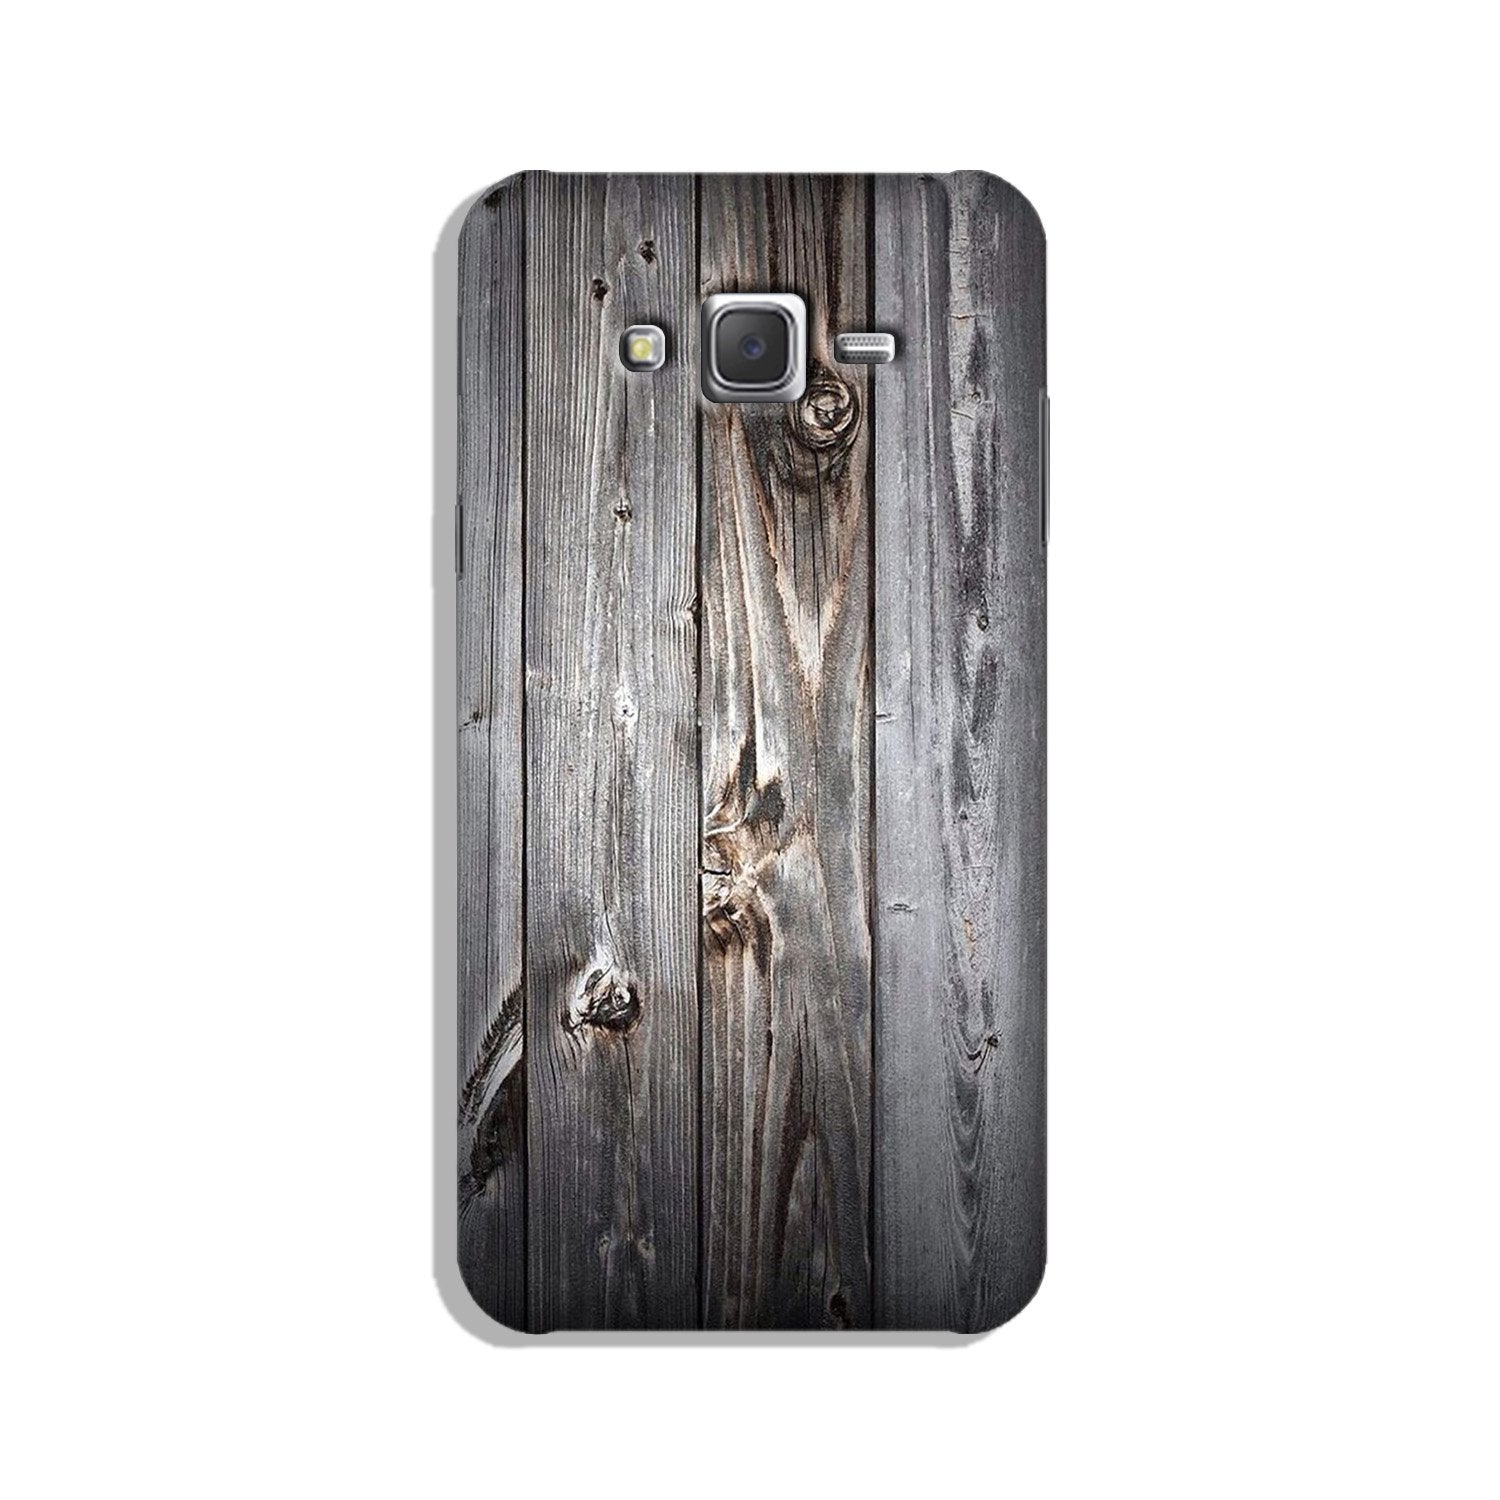 Wooden Look Case for Galaxy J7 Nxt  (Design - 114)